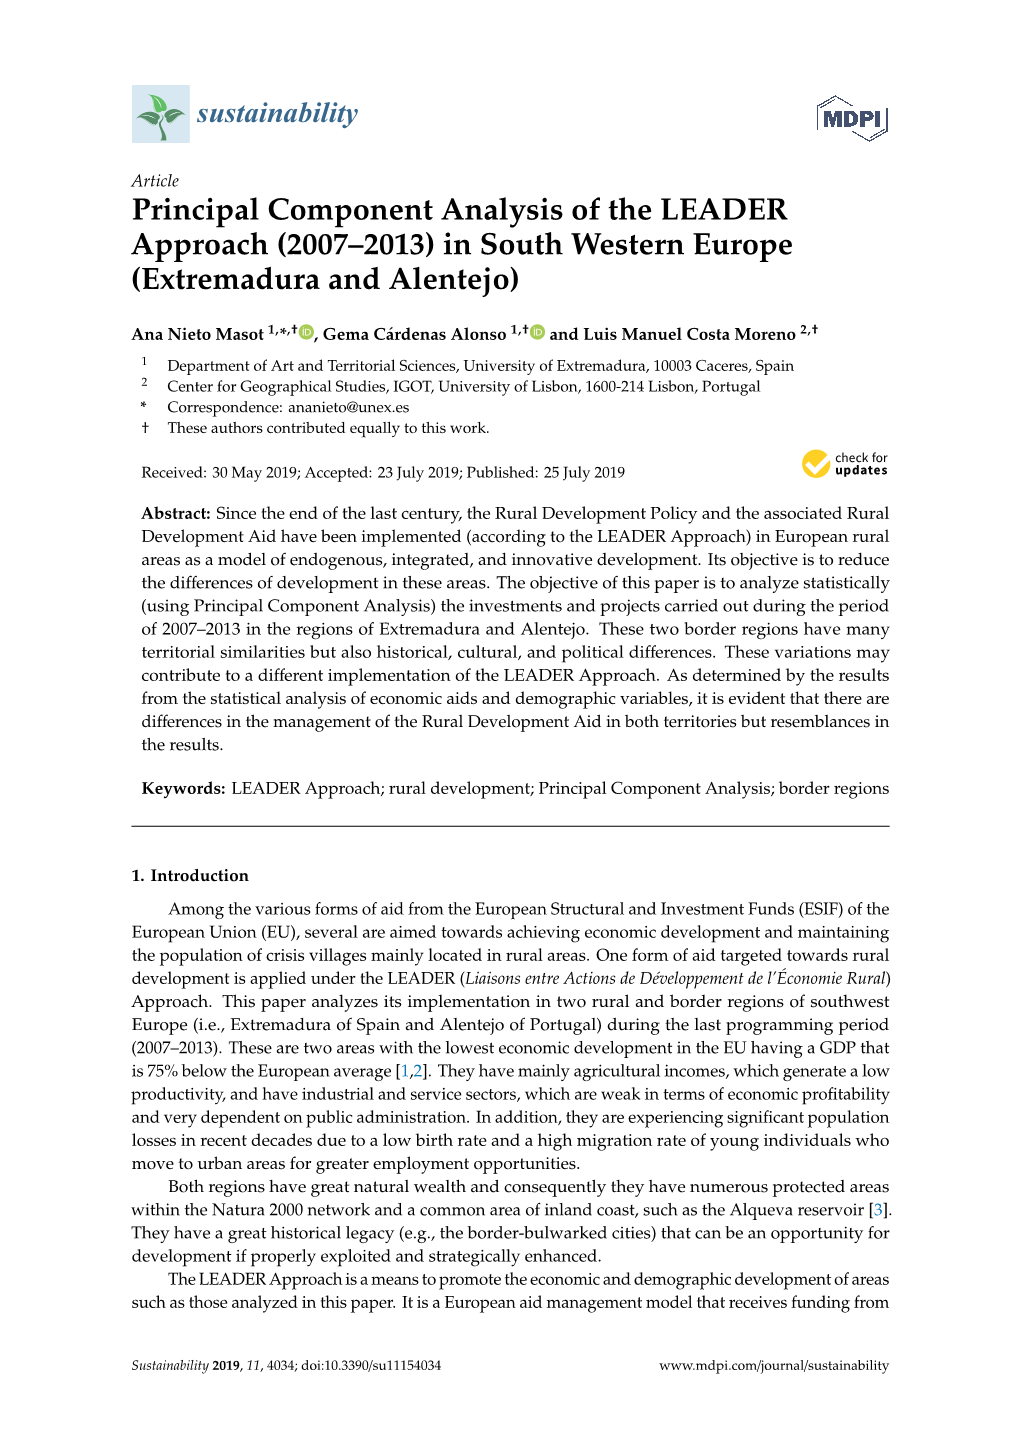 Principal Component Analysis of the LEADER Approach (2007–2013) in South Western Europe (Extremadura and Alentejo)